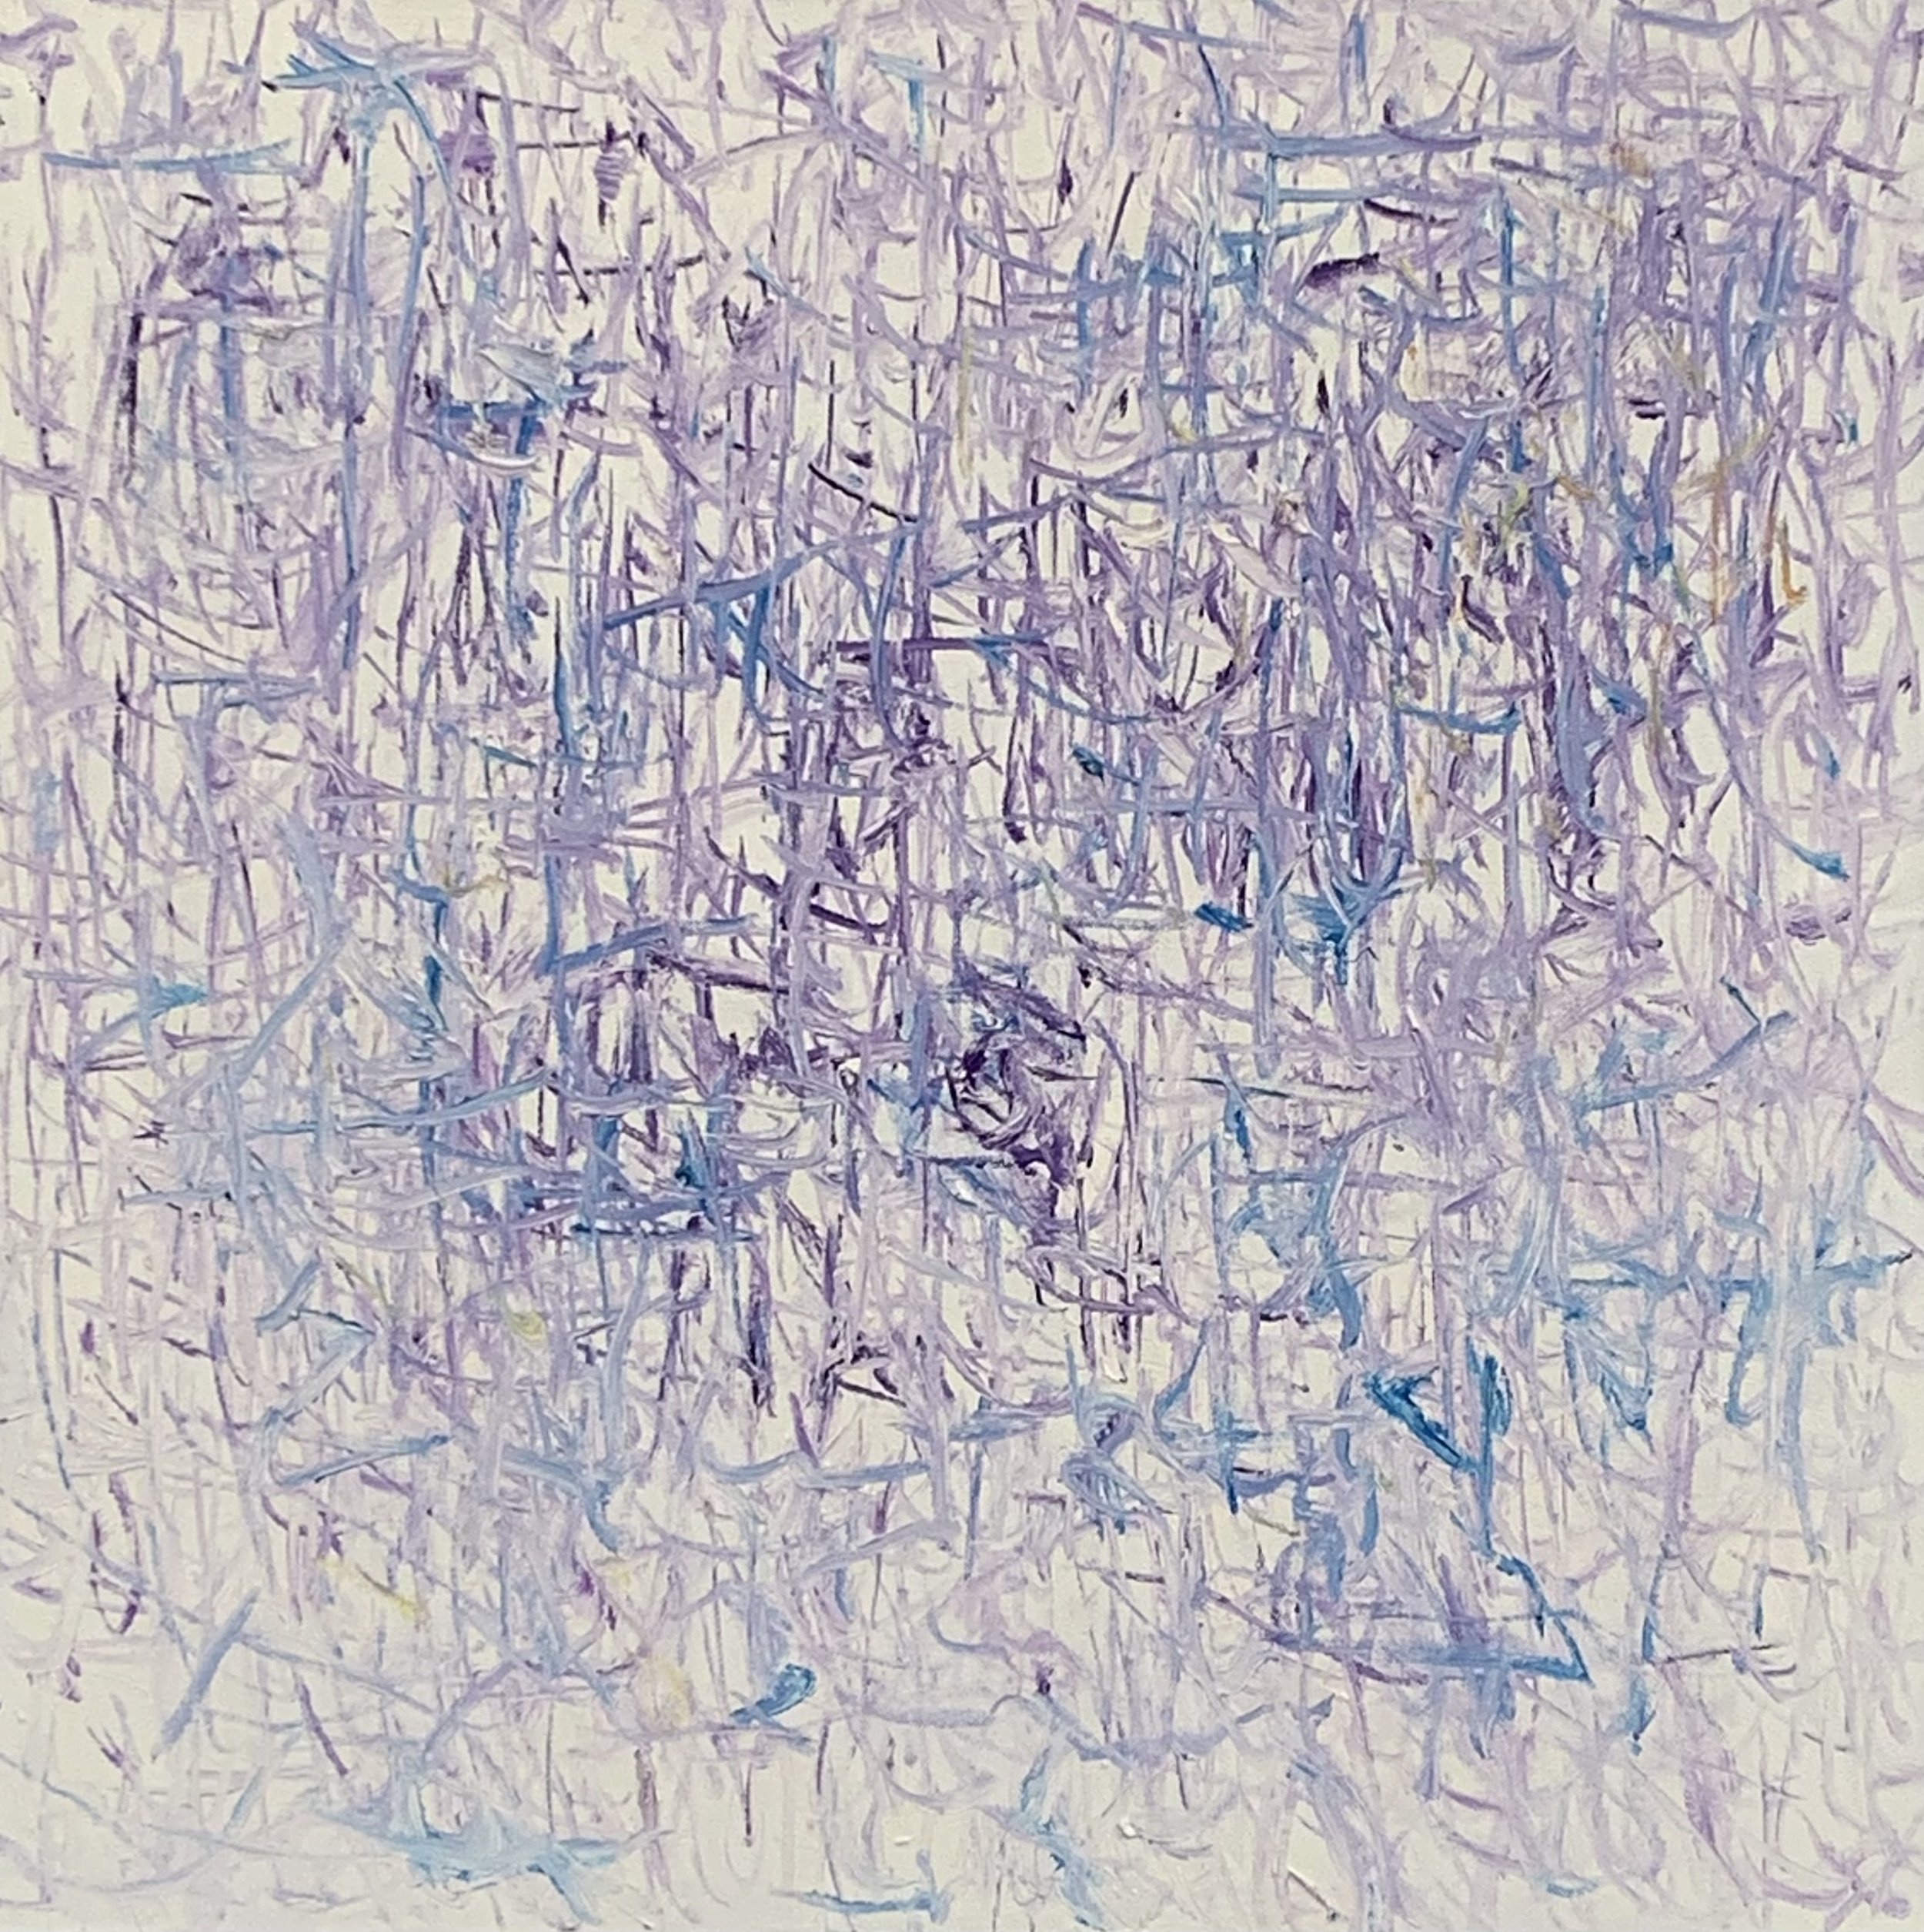 “Opening No. 117,” oil on canvas, 24”x24”, March 31-2020